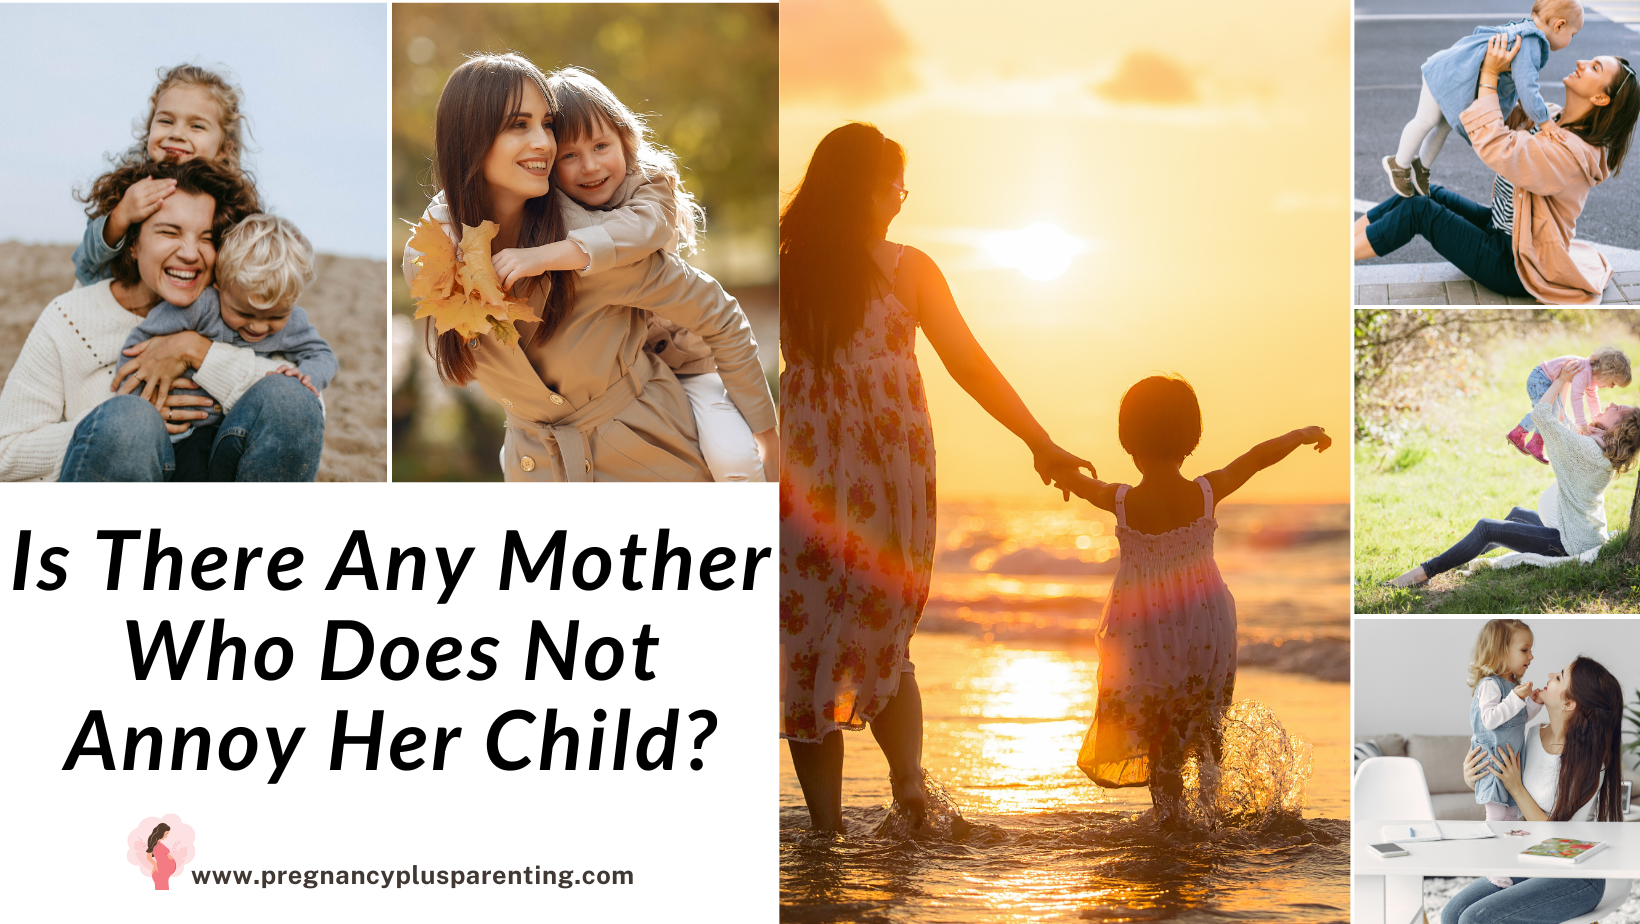 Is There Any Mother Who Does Not Annoy Her Child?